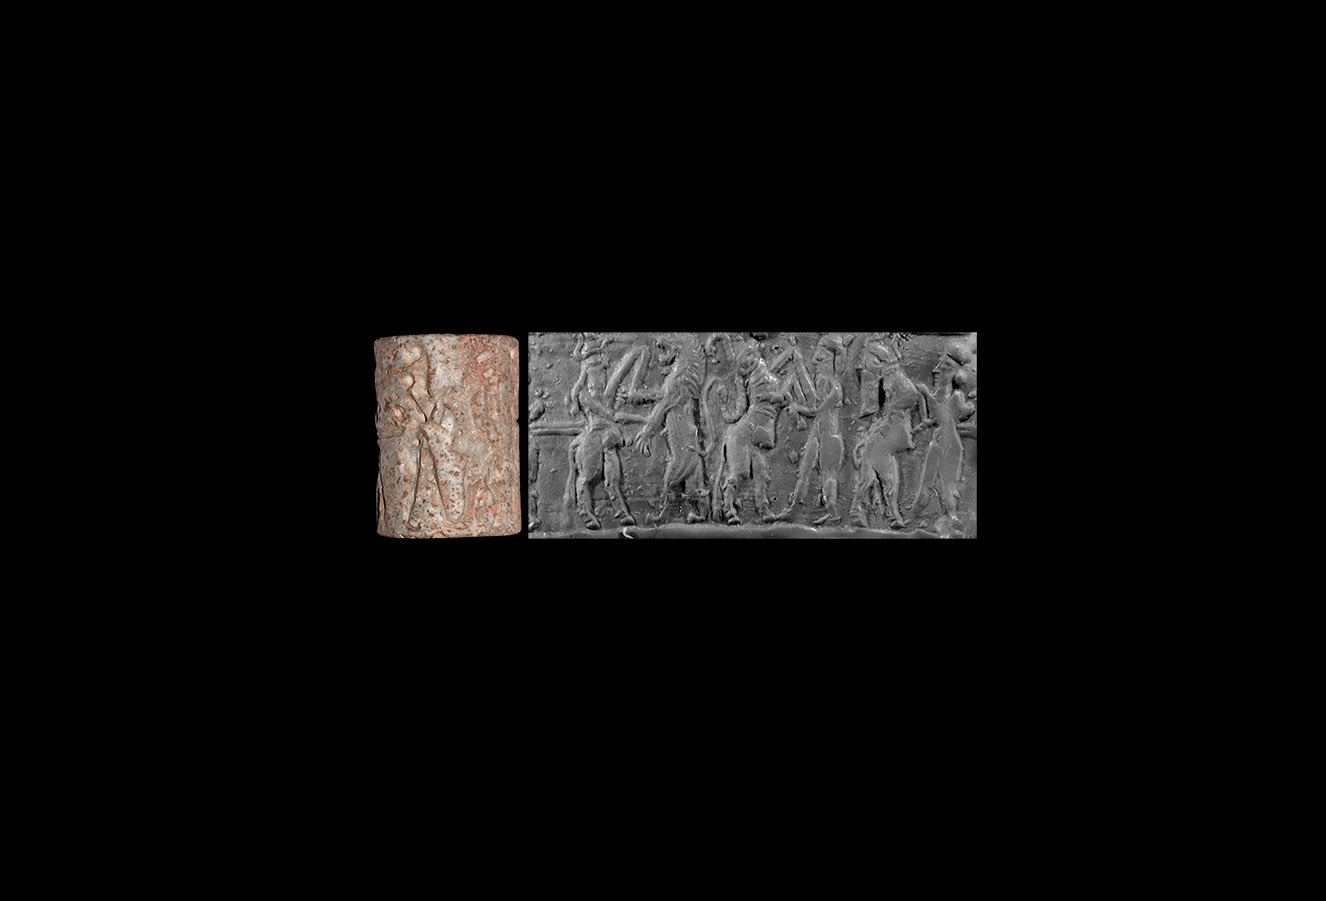 Western Asiatic Old Akkadian Cylinder Seal with Combat Scene